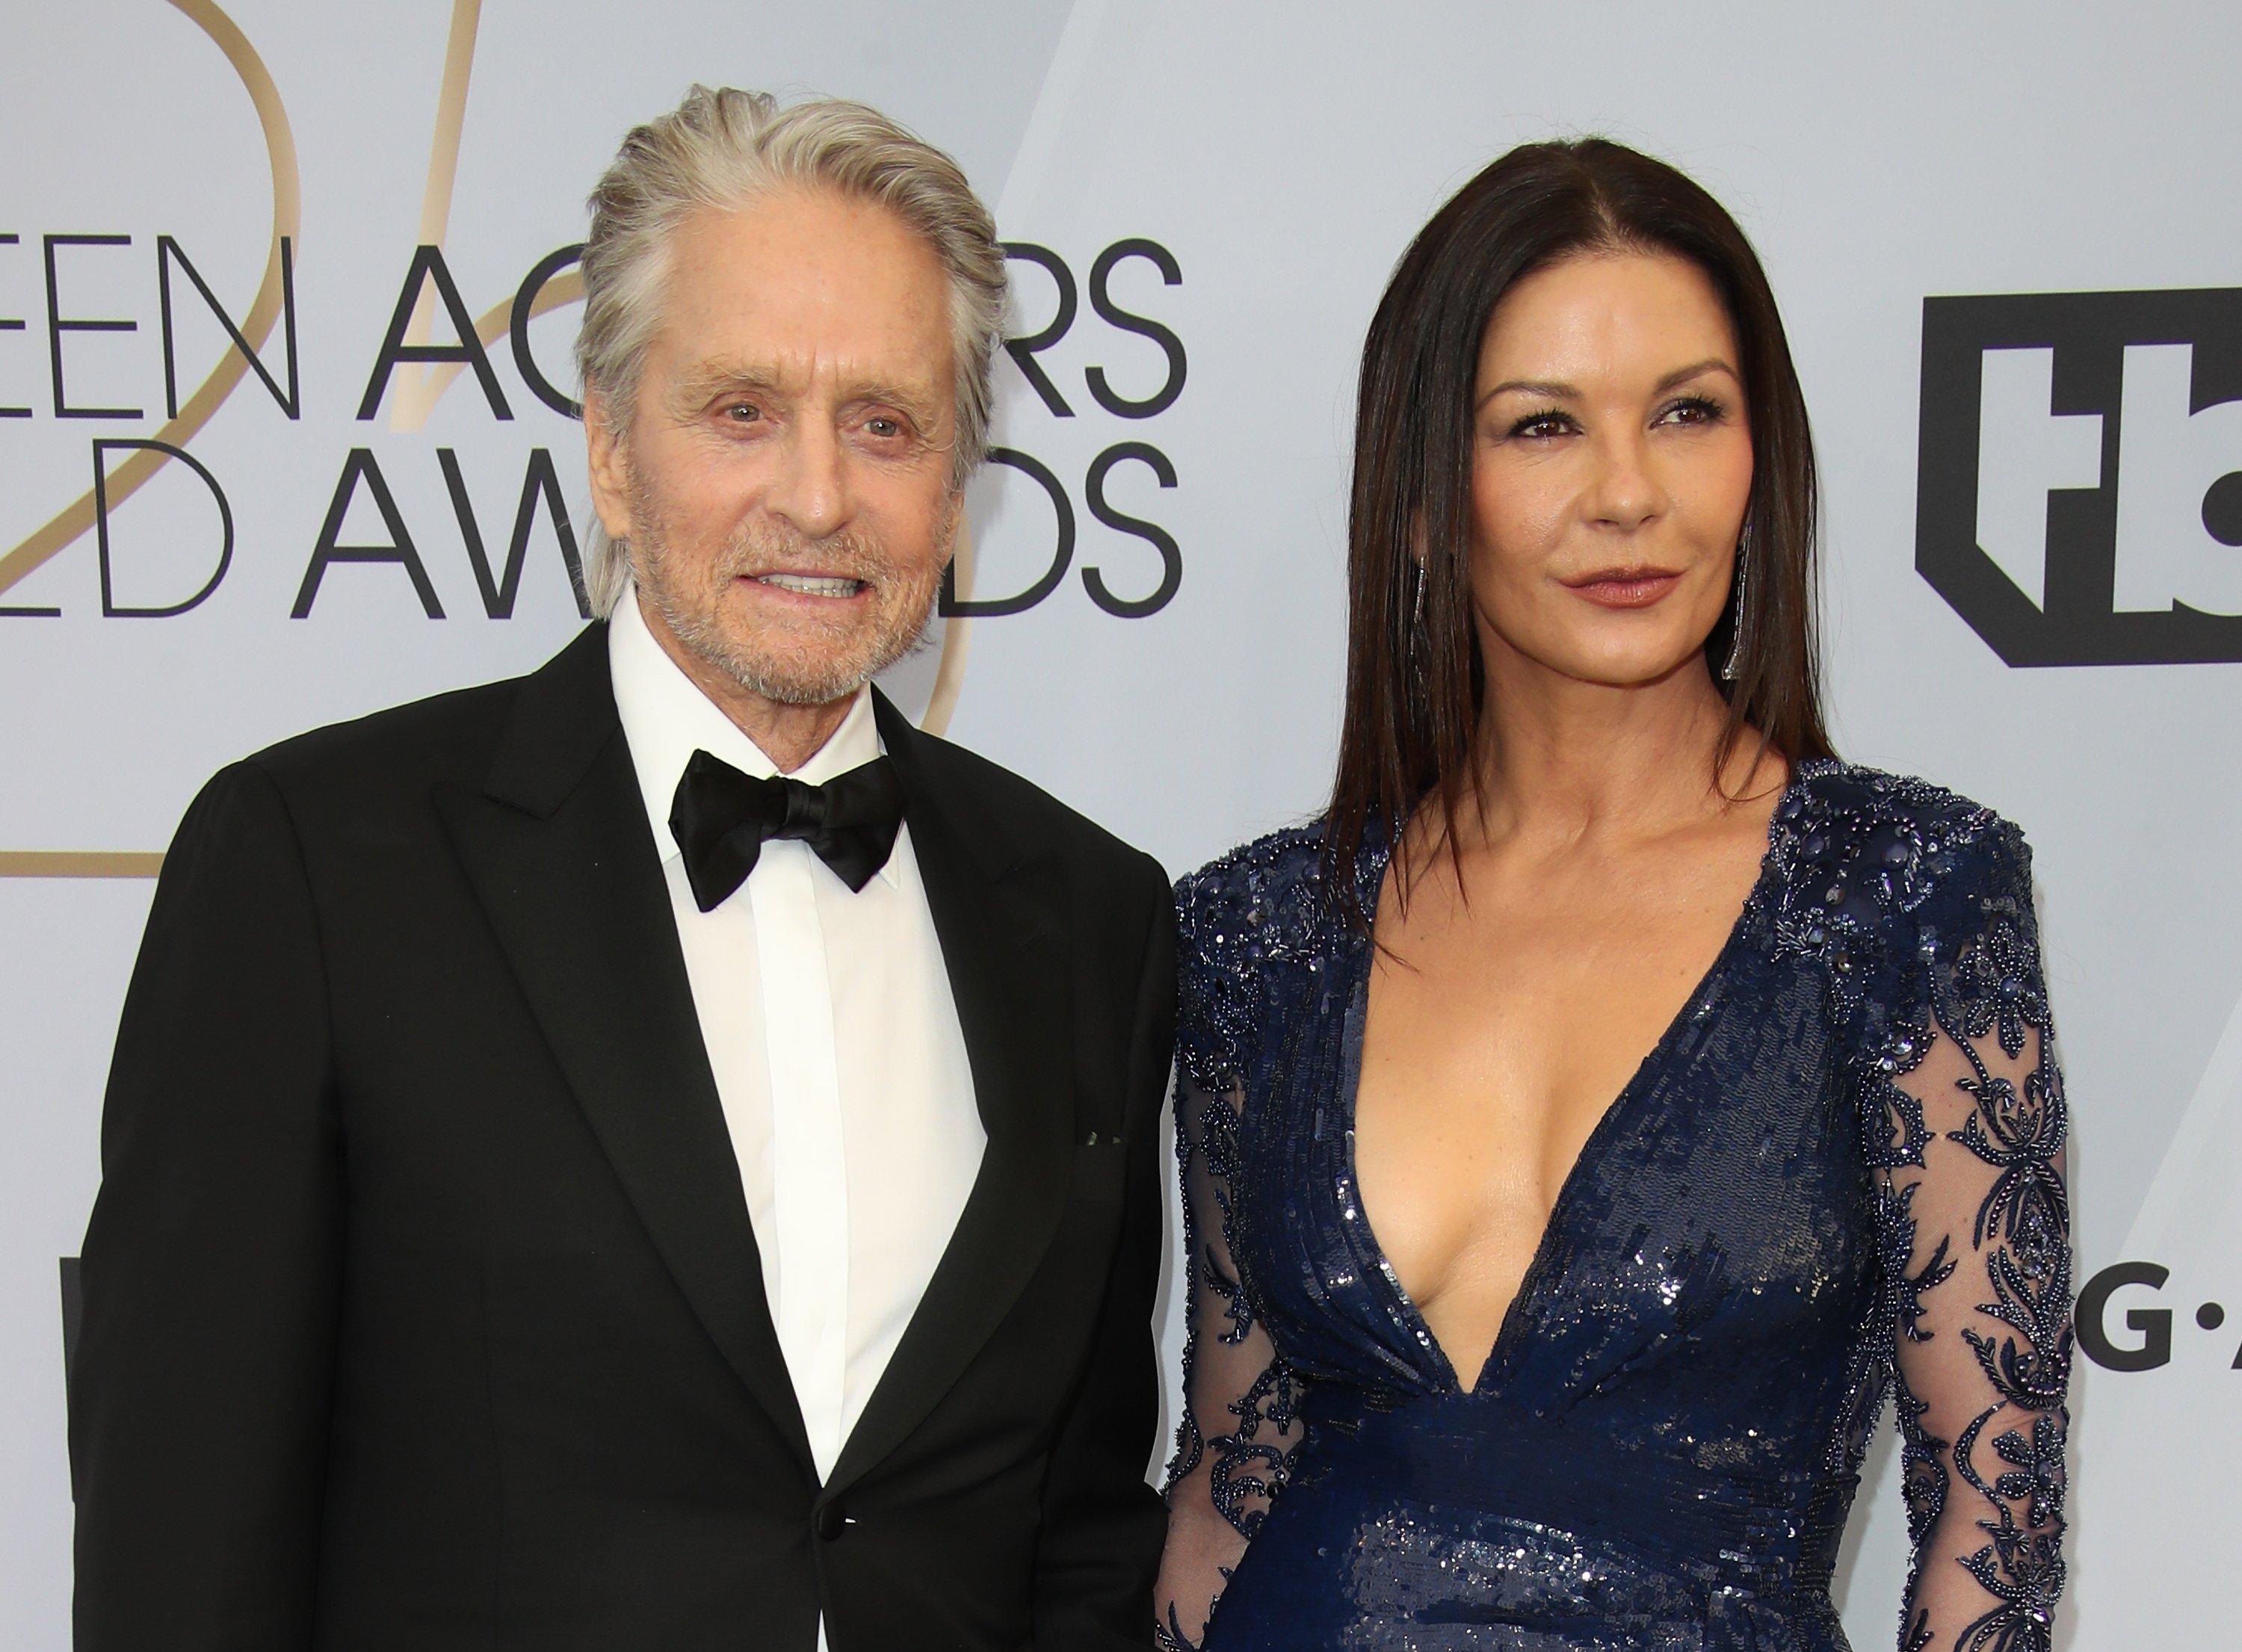 Michael Douglas and Catherine Zeta-Jones at the 25th Annual Screen Actors Guild Awards at The Shrine Auditorium on January 27, 2019 in Los Angeles, California | Photo: Getty Images